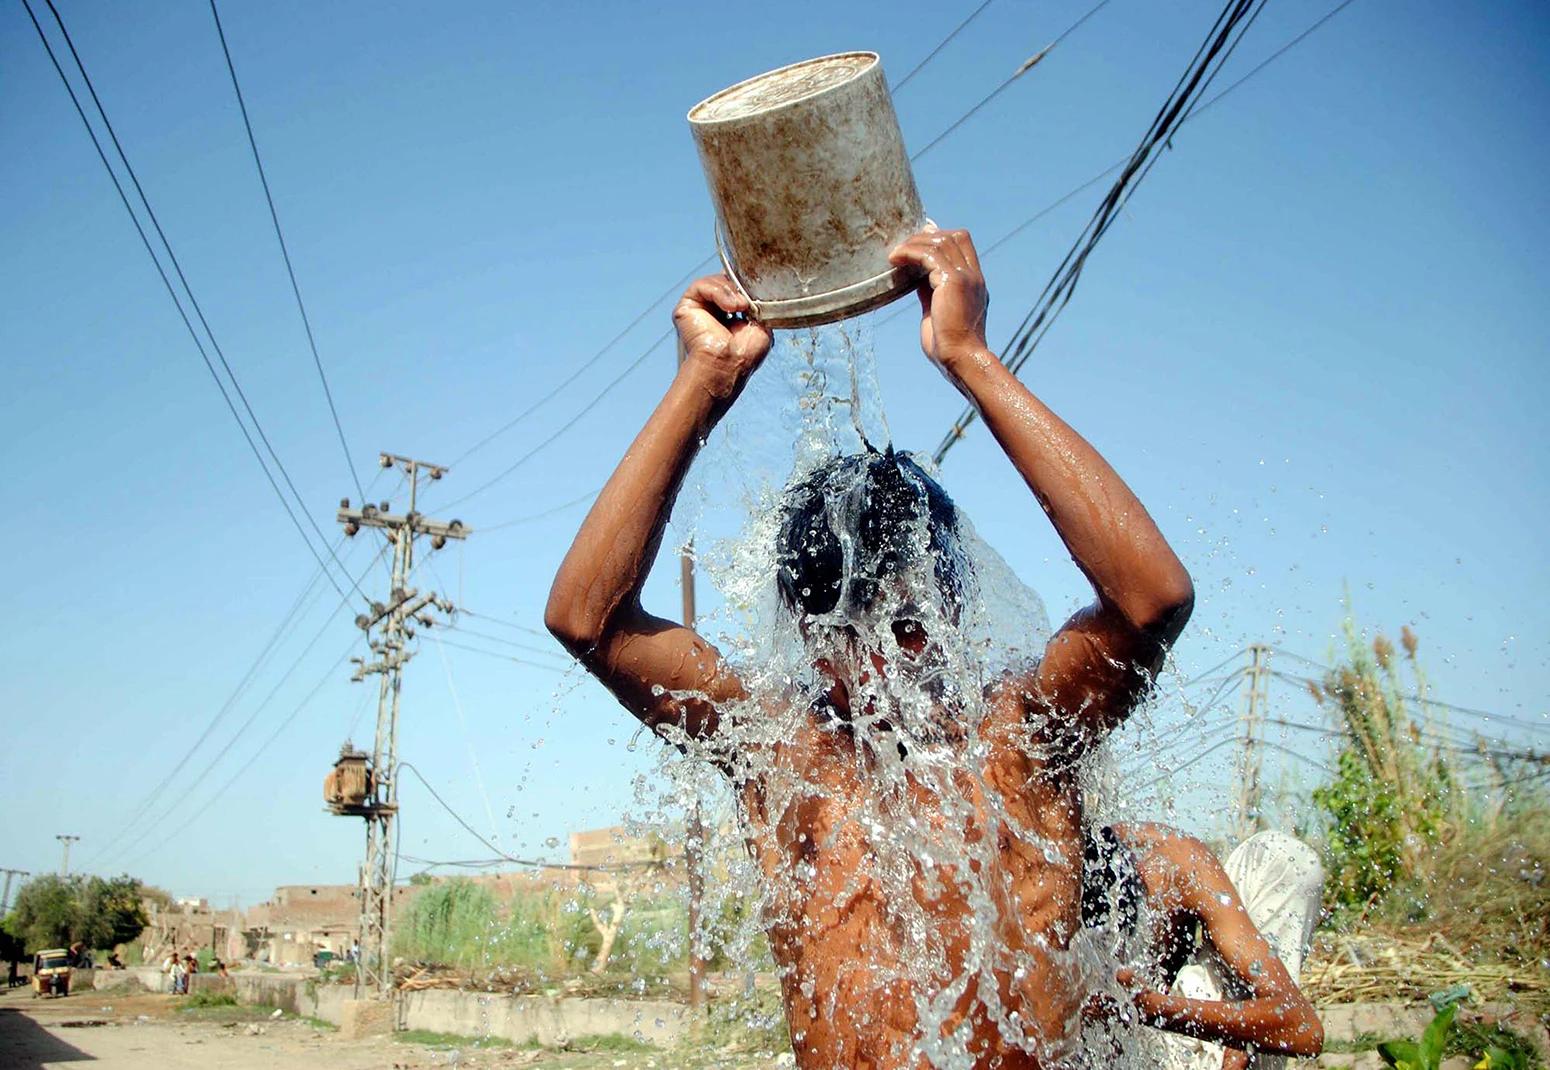 A young man pours water over himself during a heatwave in Hyderabad, Pakistan, on 4 April 2022.